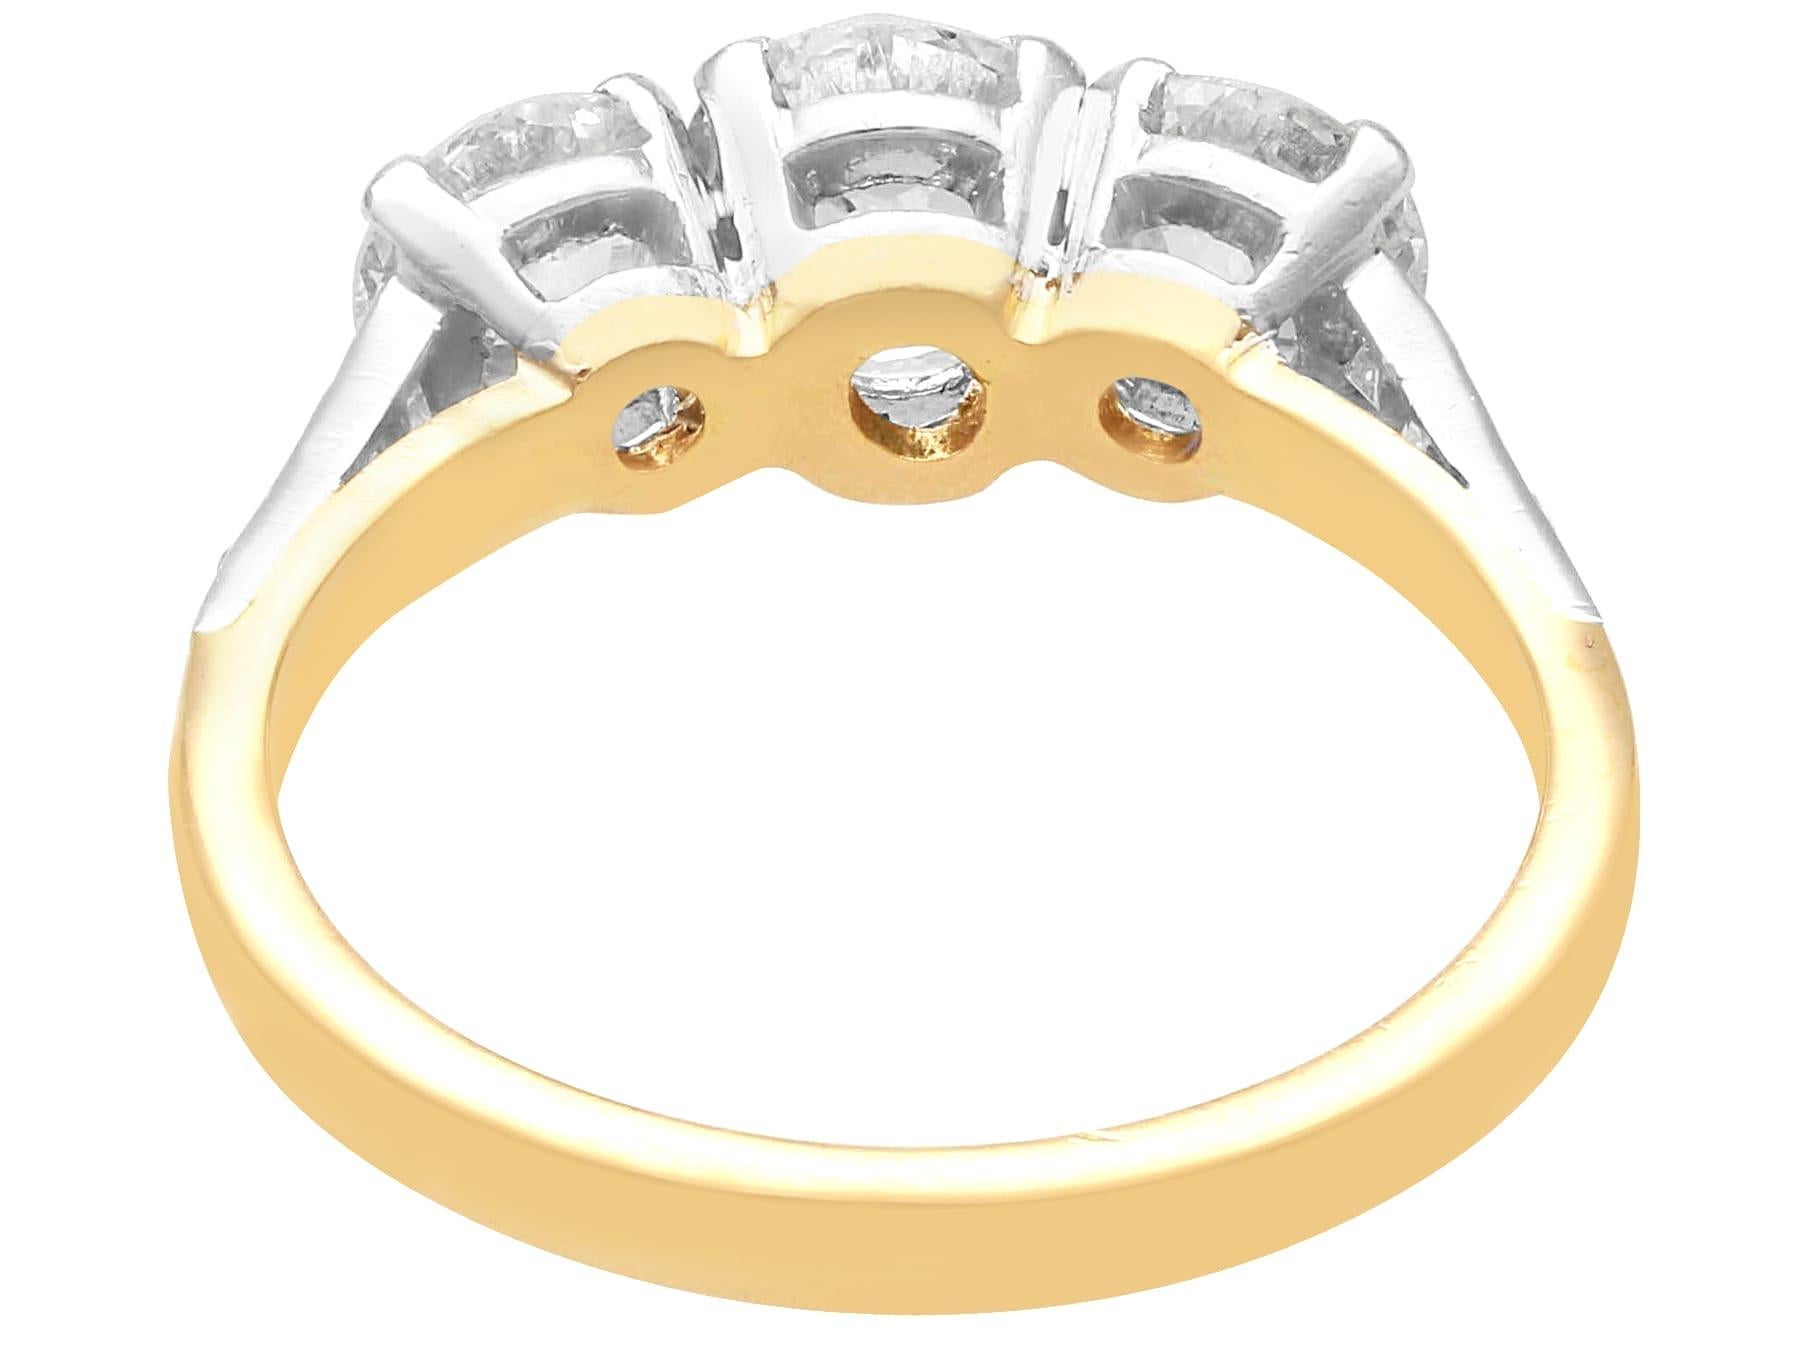 Women's or Men's Antique 2.63Ct Diamond and 18k Yellow Gold Trilogy Ring Circa 1925 For Sale